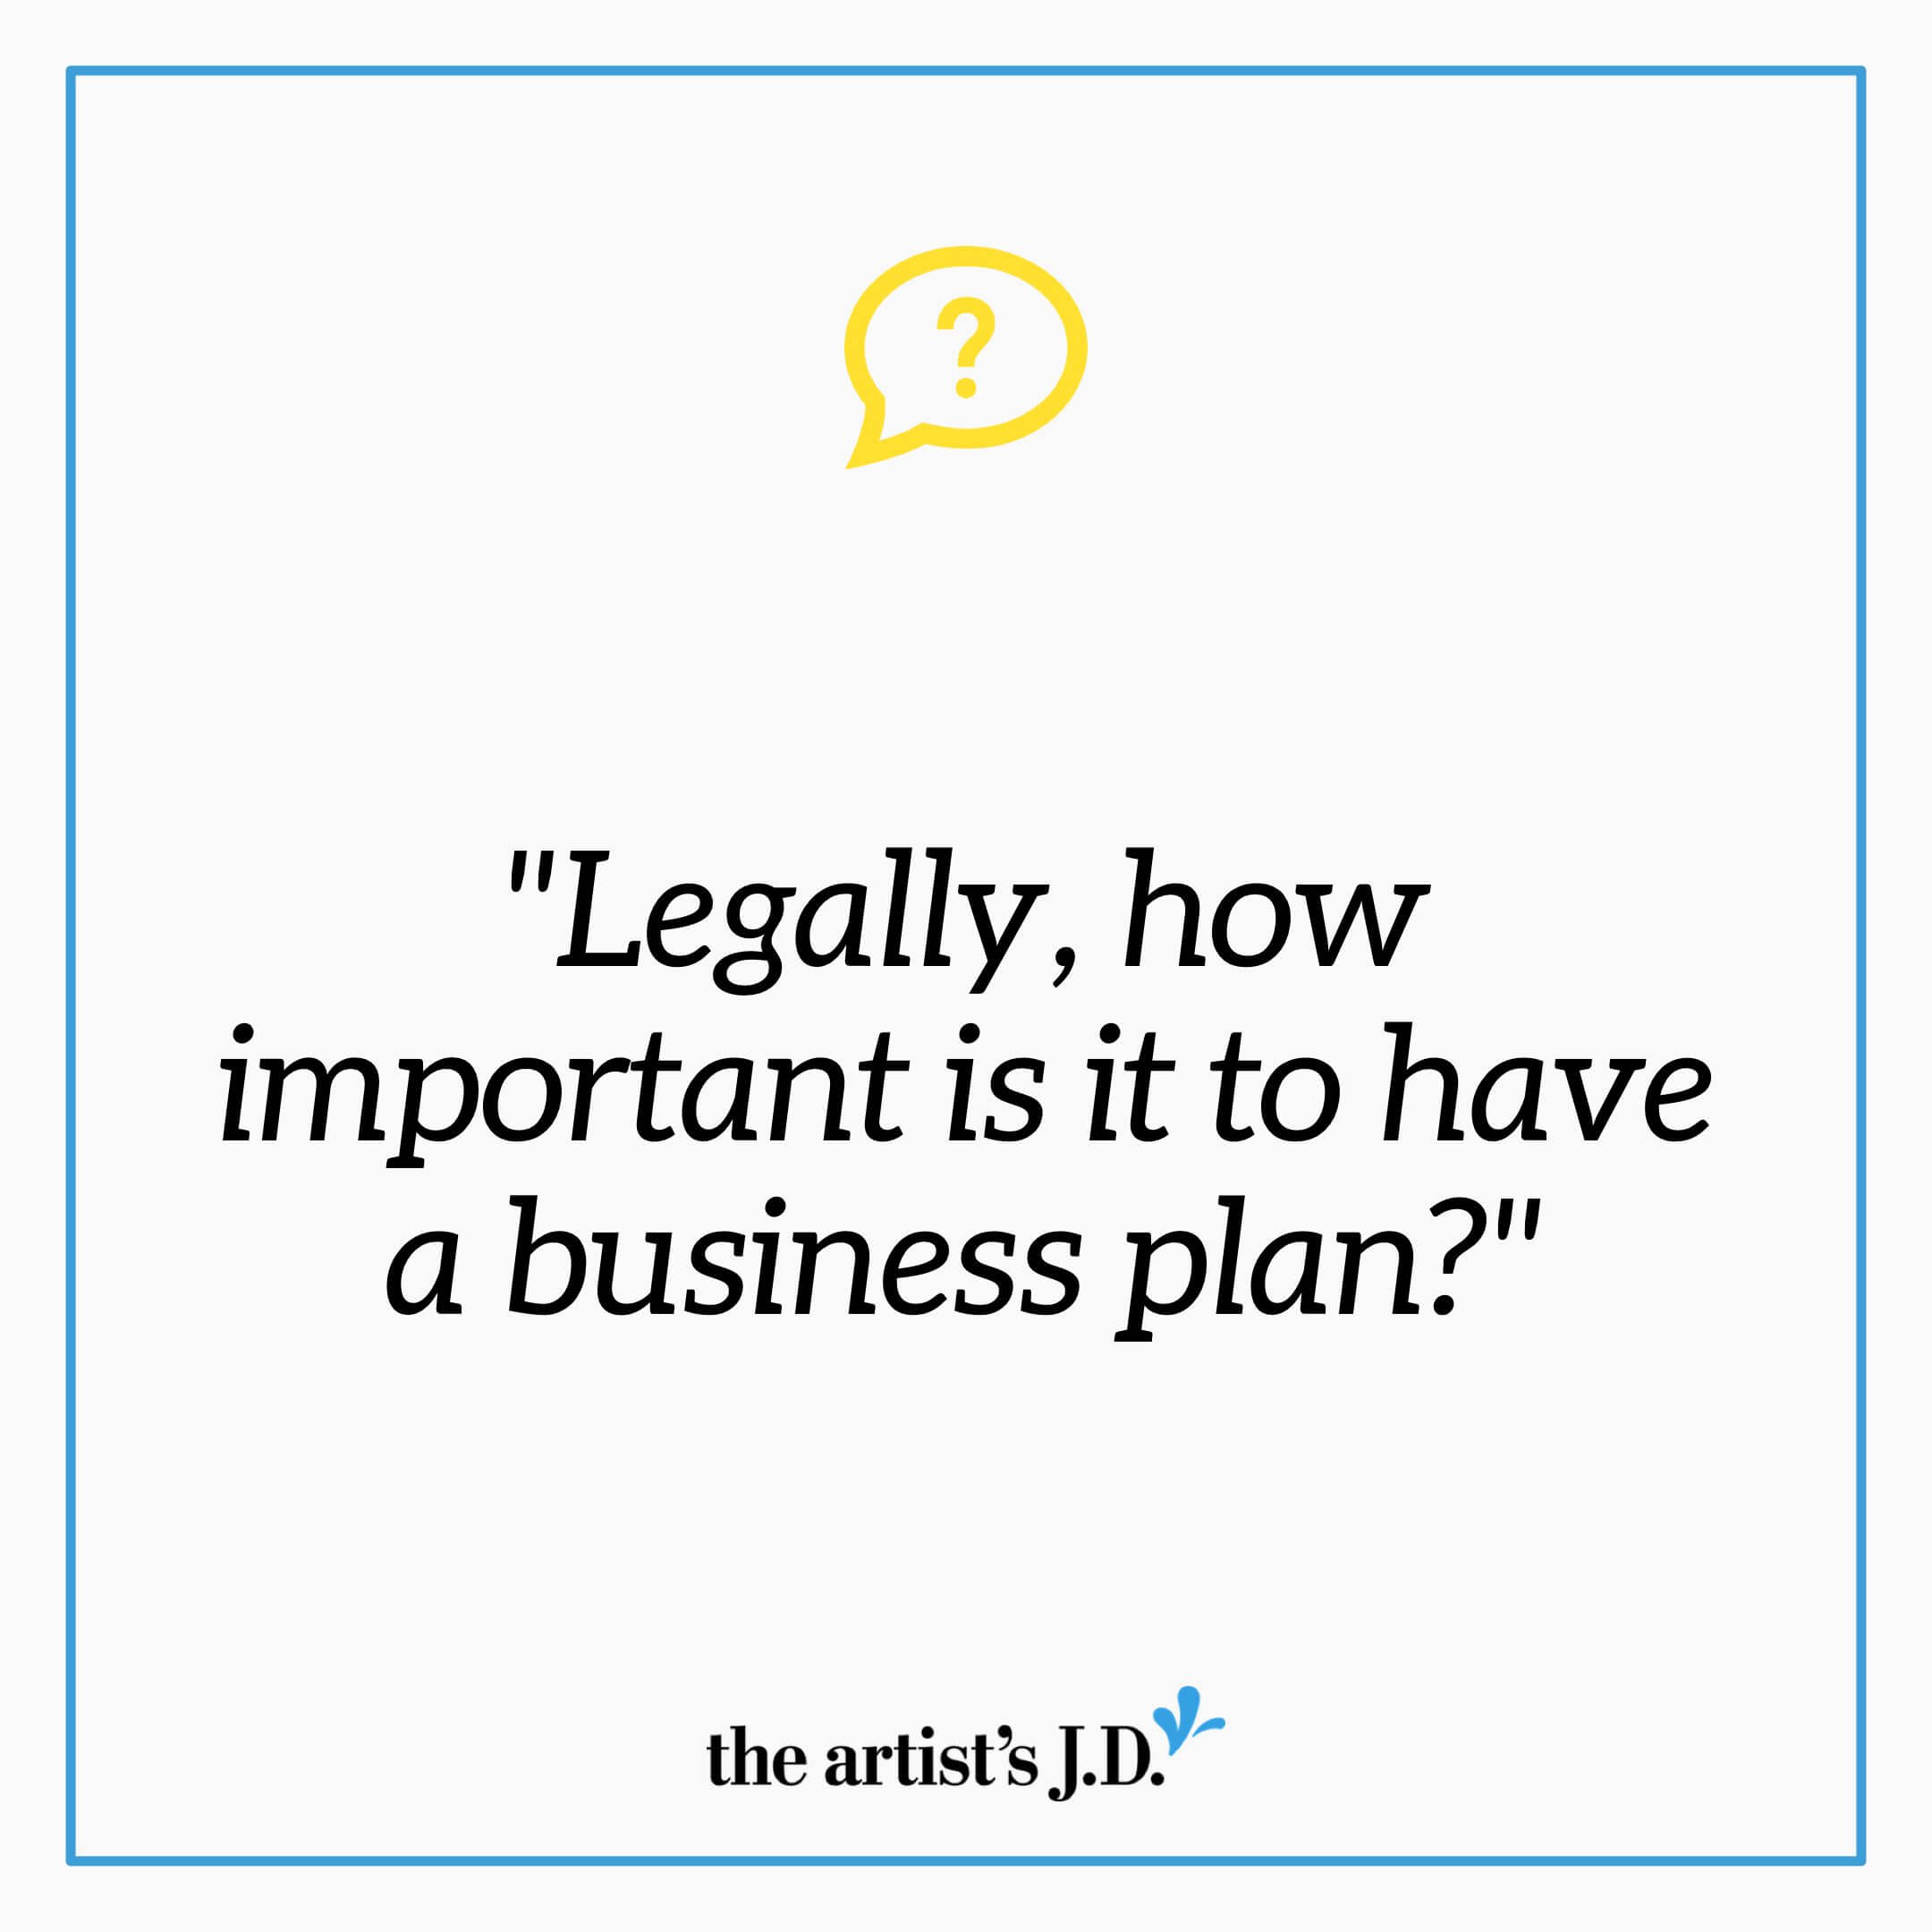 A business plan is critical for every creative business. Head here to grab a 1-page business plan template for your creative biz.